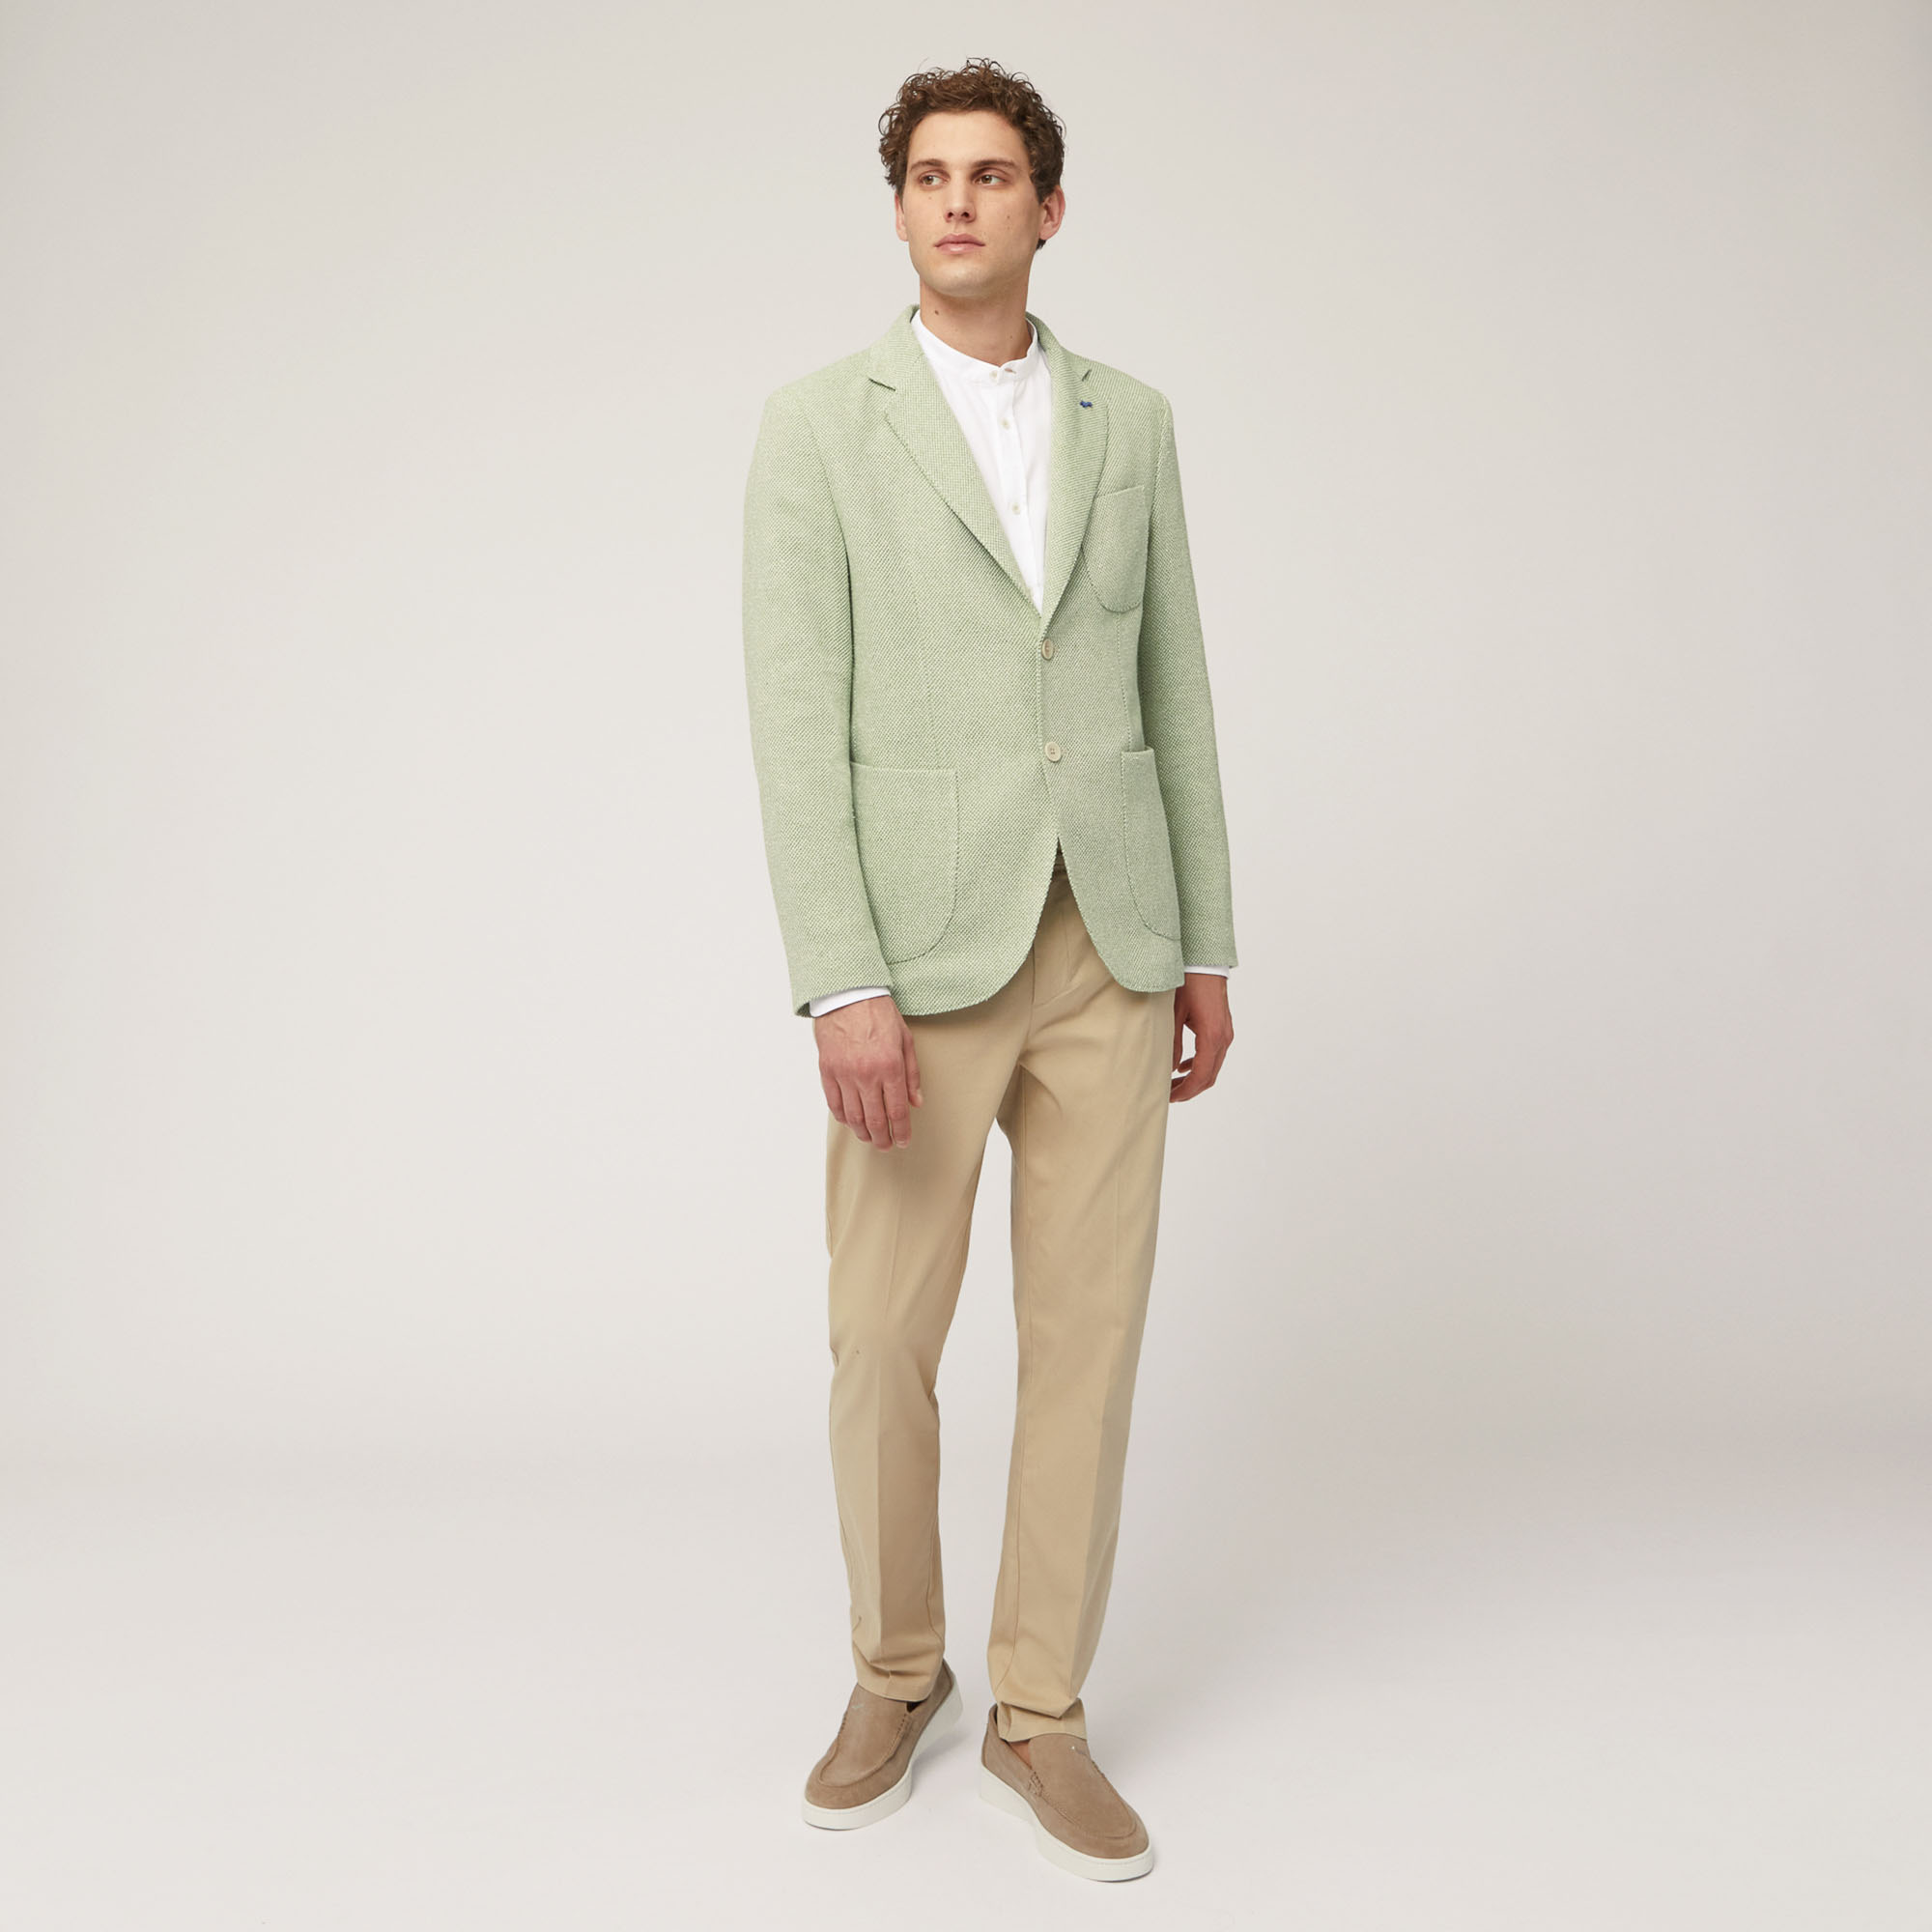 Cotton and Linen Jacket with Pockets and Breast Pocket, Herb, large image number 3